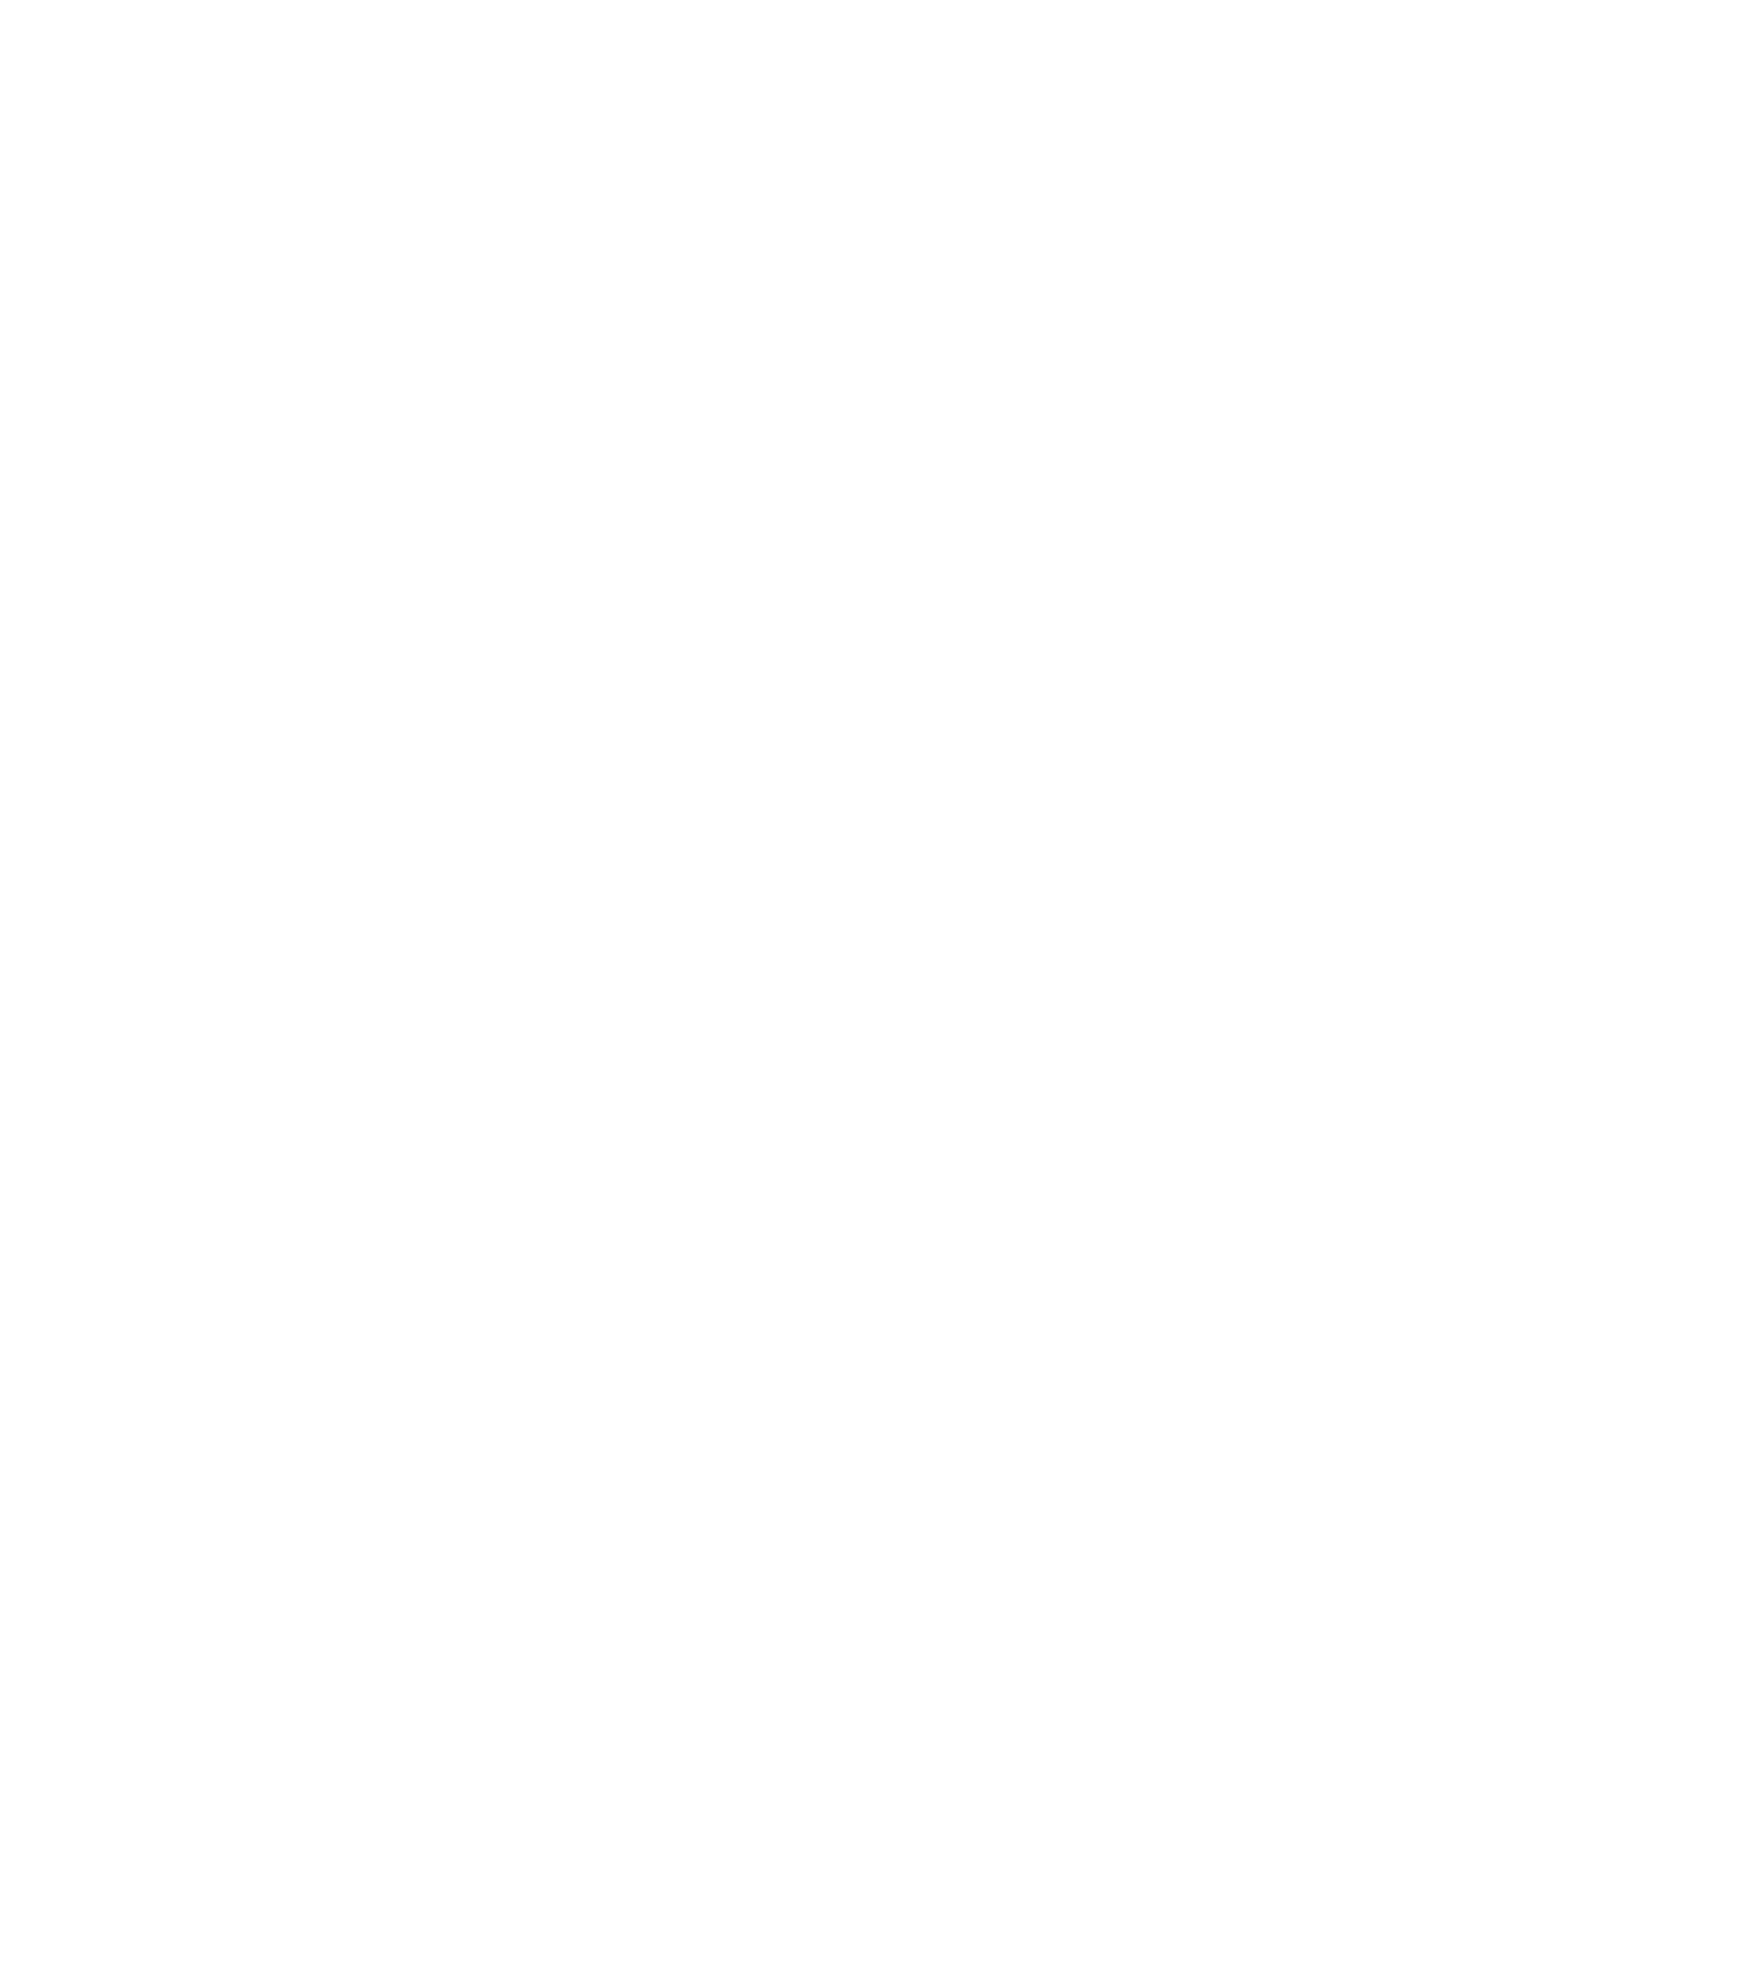 Home - Android App Development Banner (2167x2167)